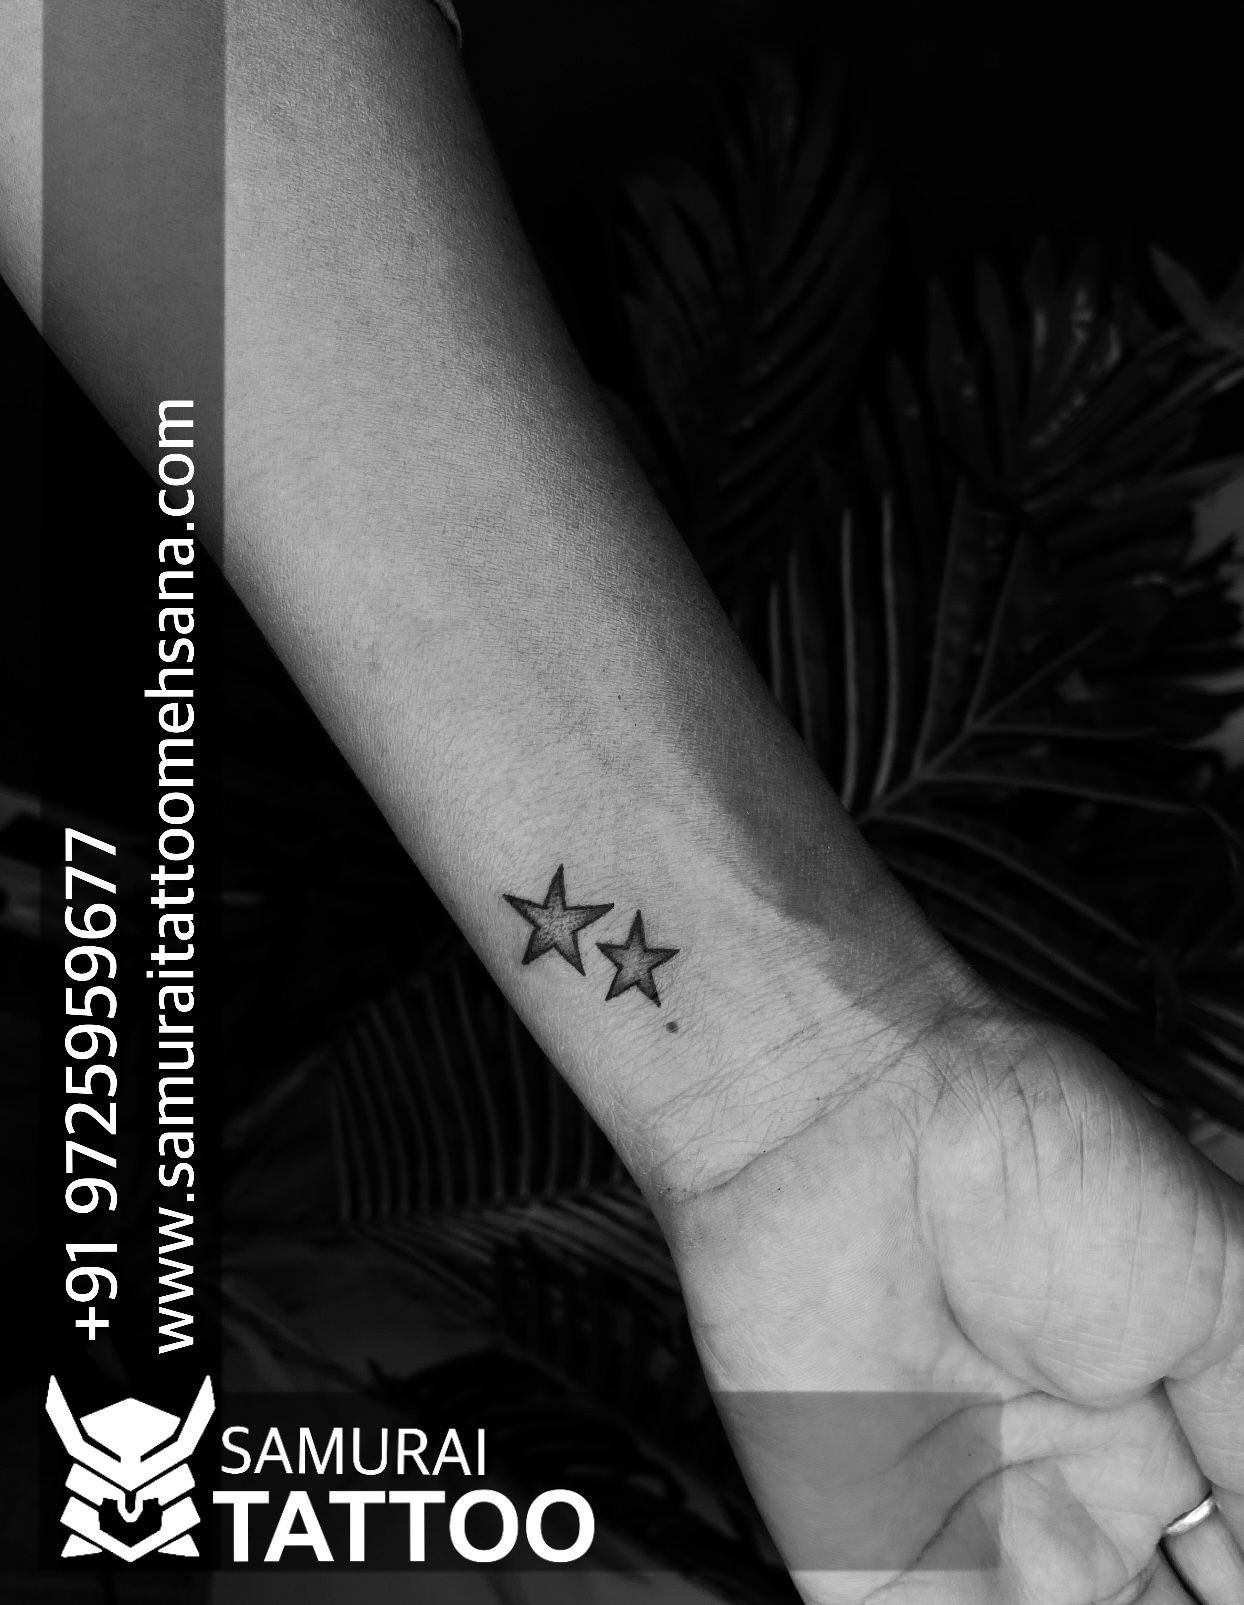 54 Star Tattoo Designs and Their Meanings Explained 2022